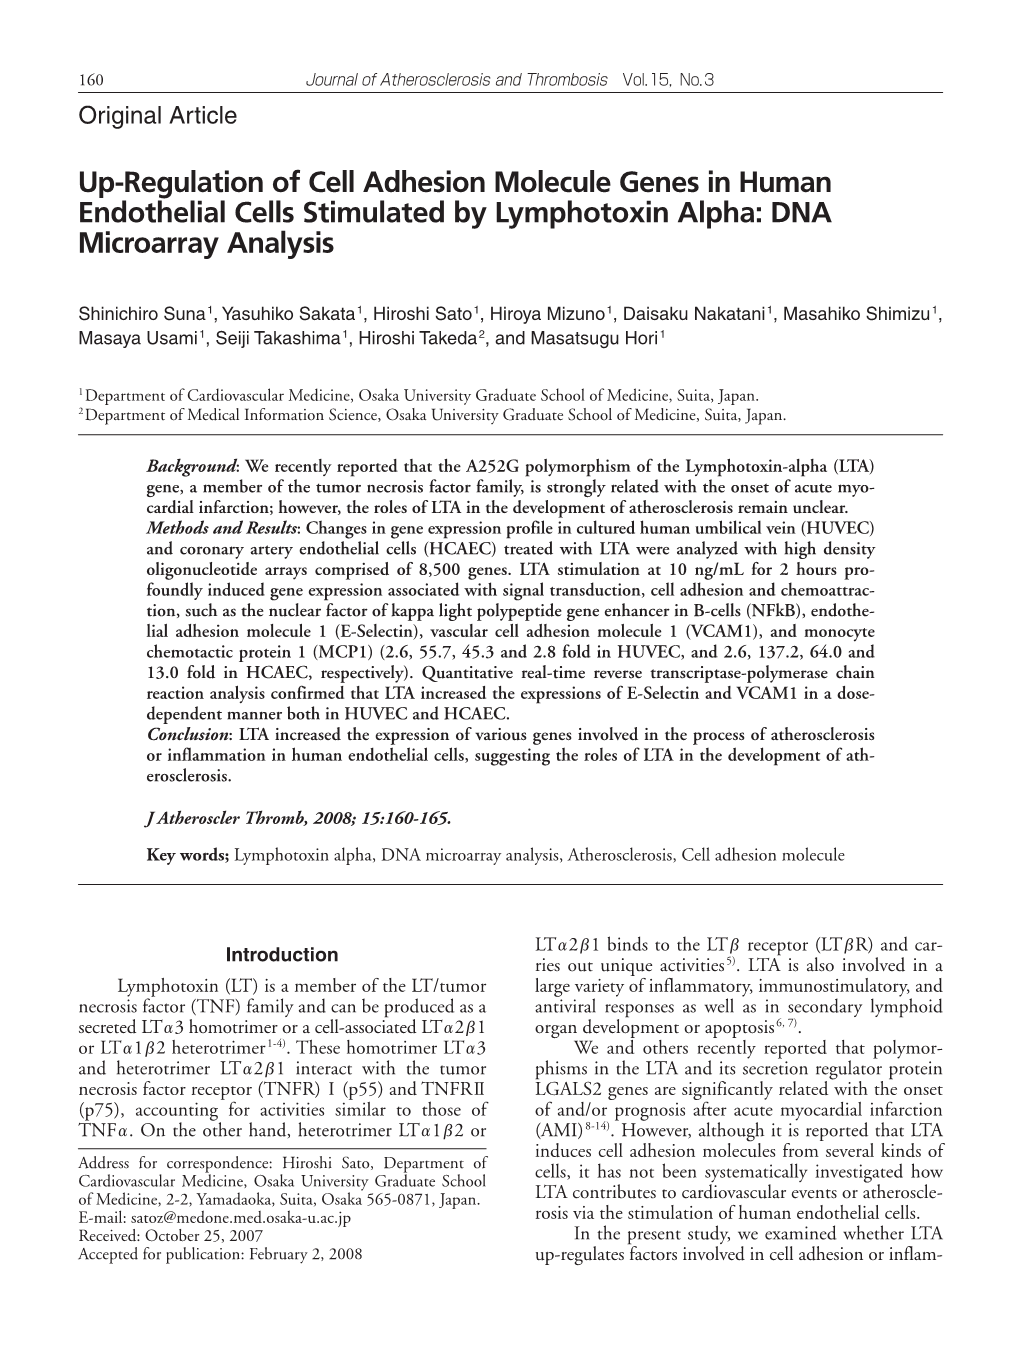 Up-Regulation of Cell Adhesion Molecule Genes in Human Endothelial Cells Stimulated by Lymphotoxin Alpha: DNA Microarray Analysis